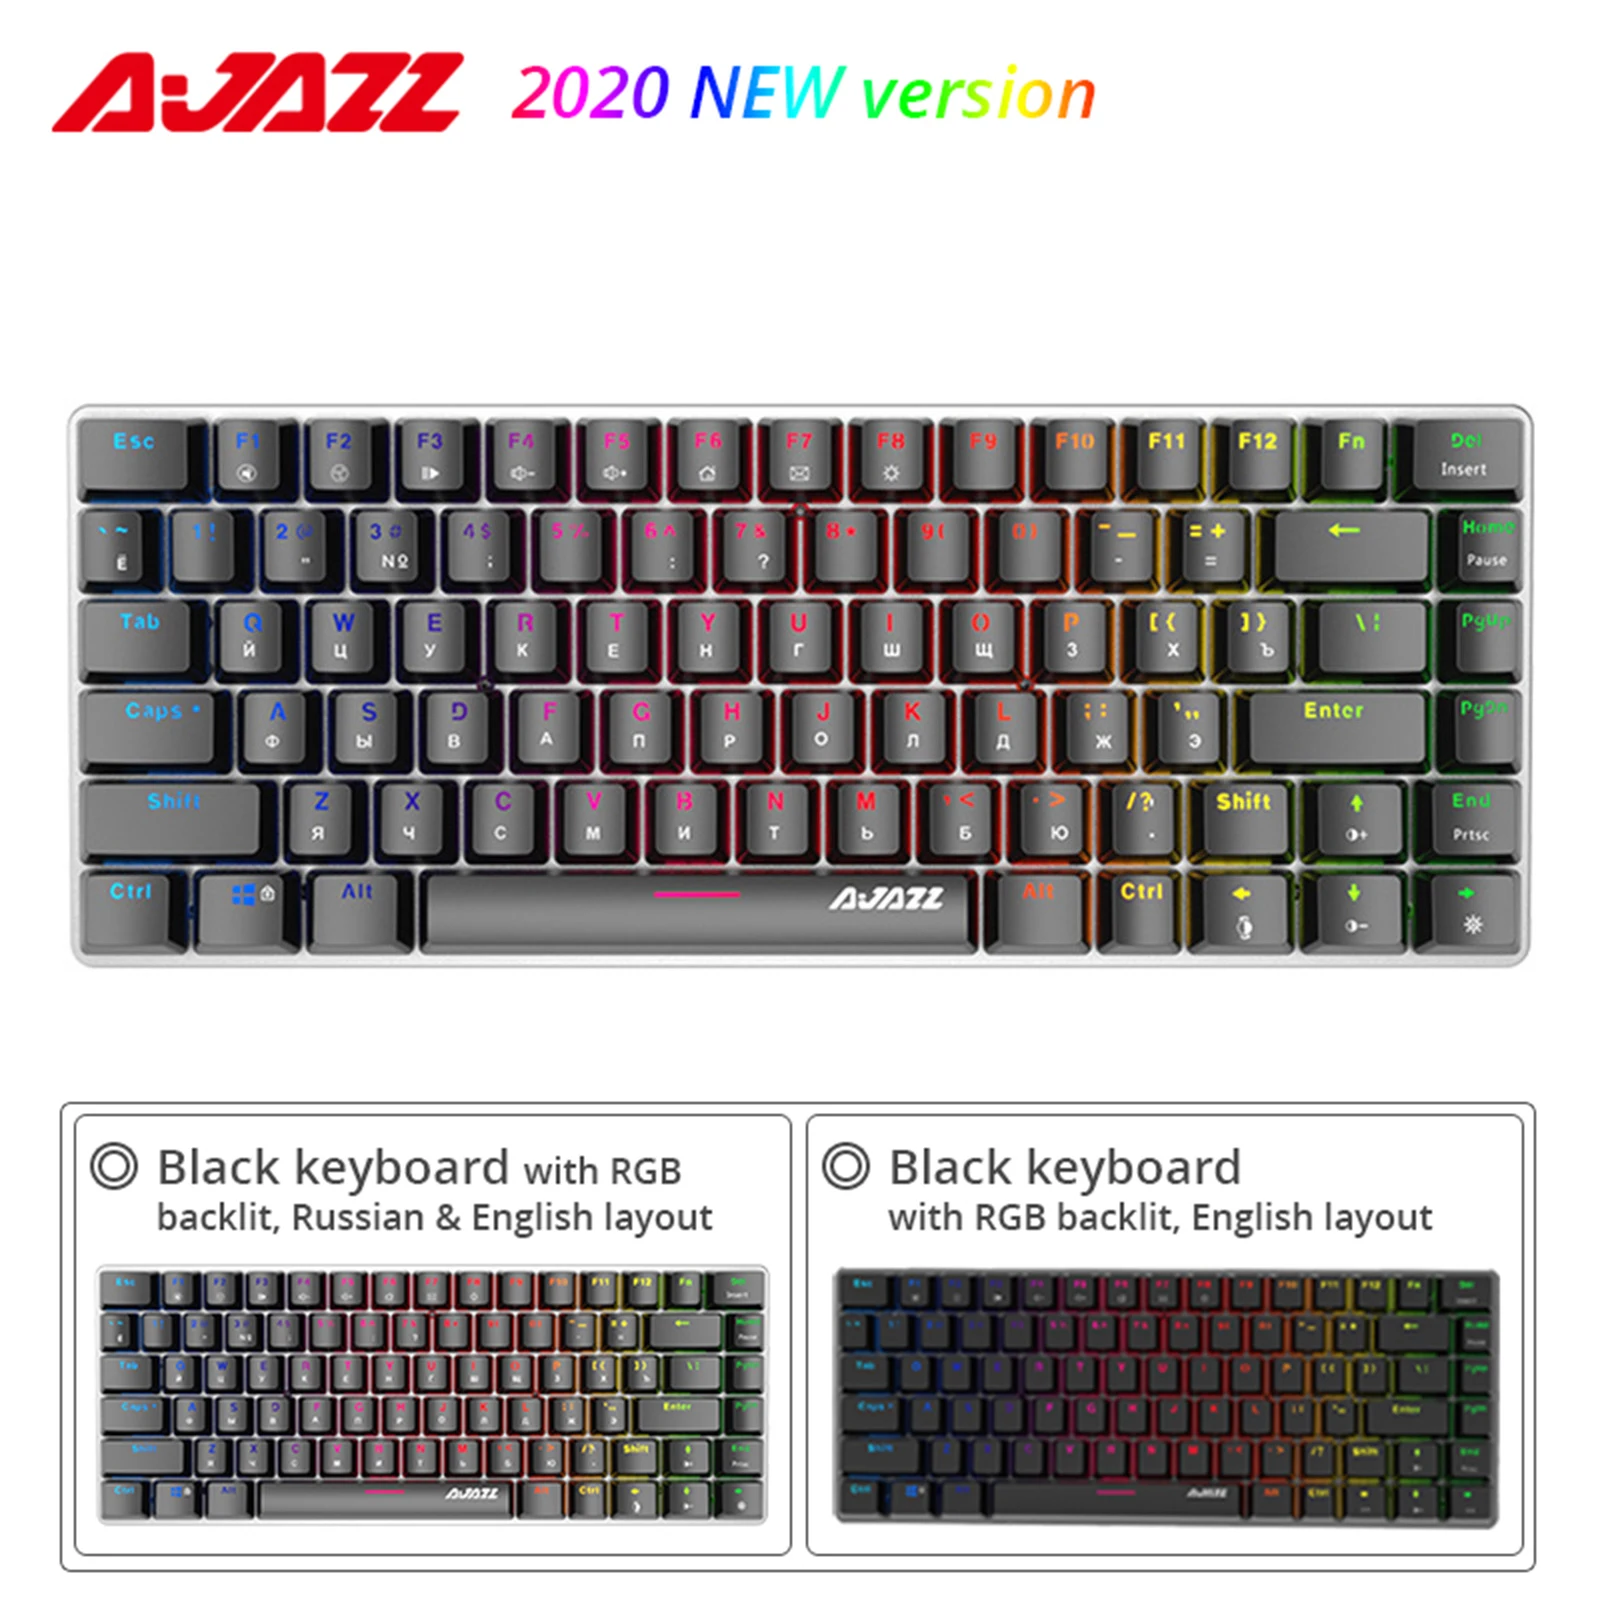 82 Keys Wired Mechanical Keyboard, RGB Backlit, for PC Laptop Gaming Office, Compact Fashion Portable Russian Layout